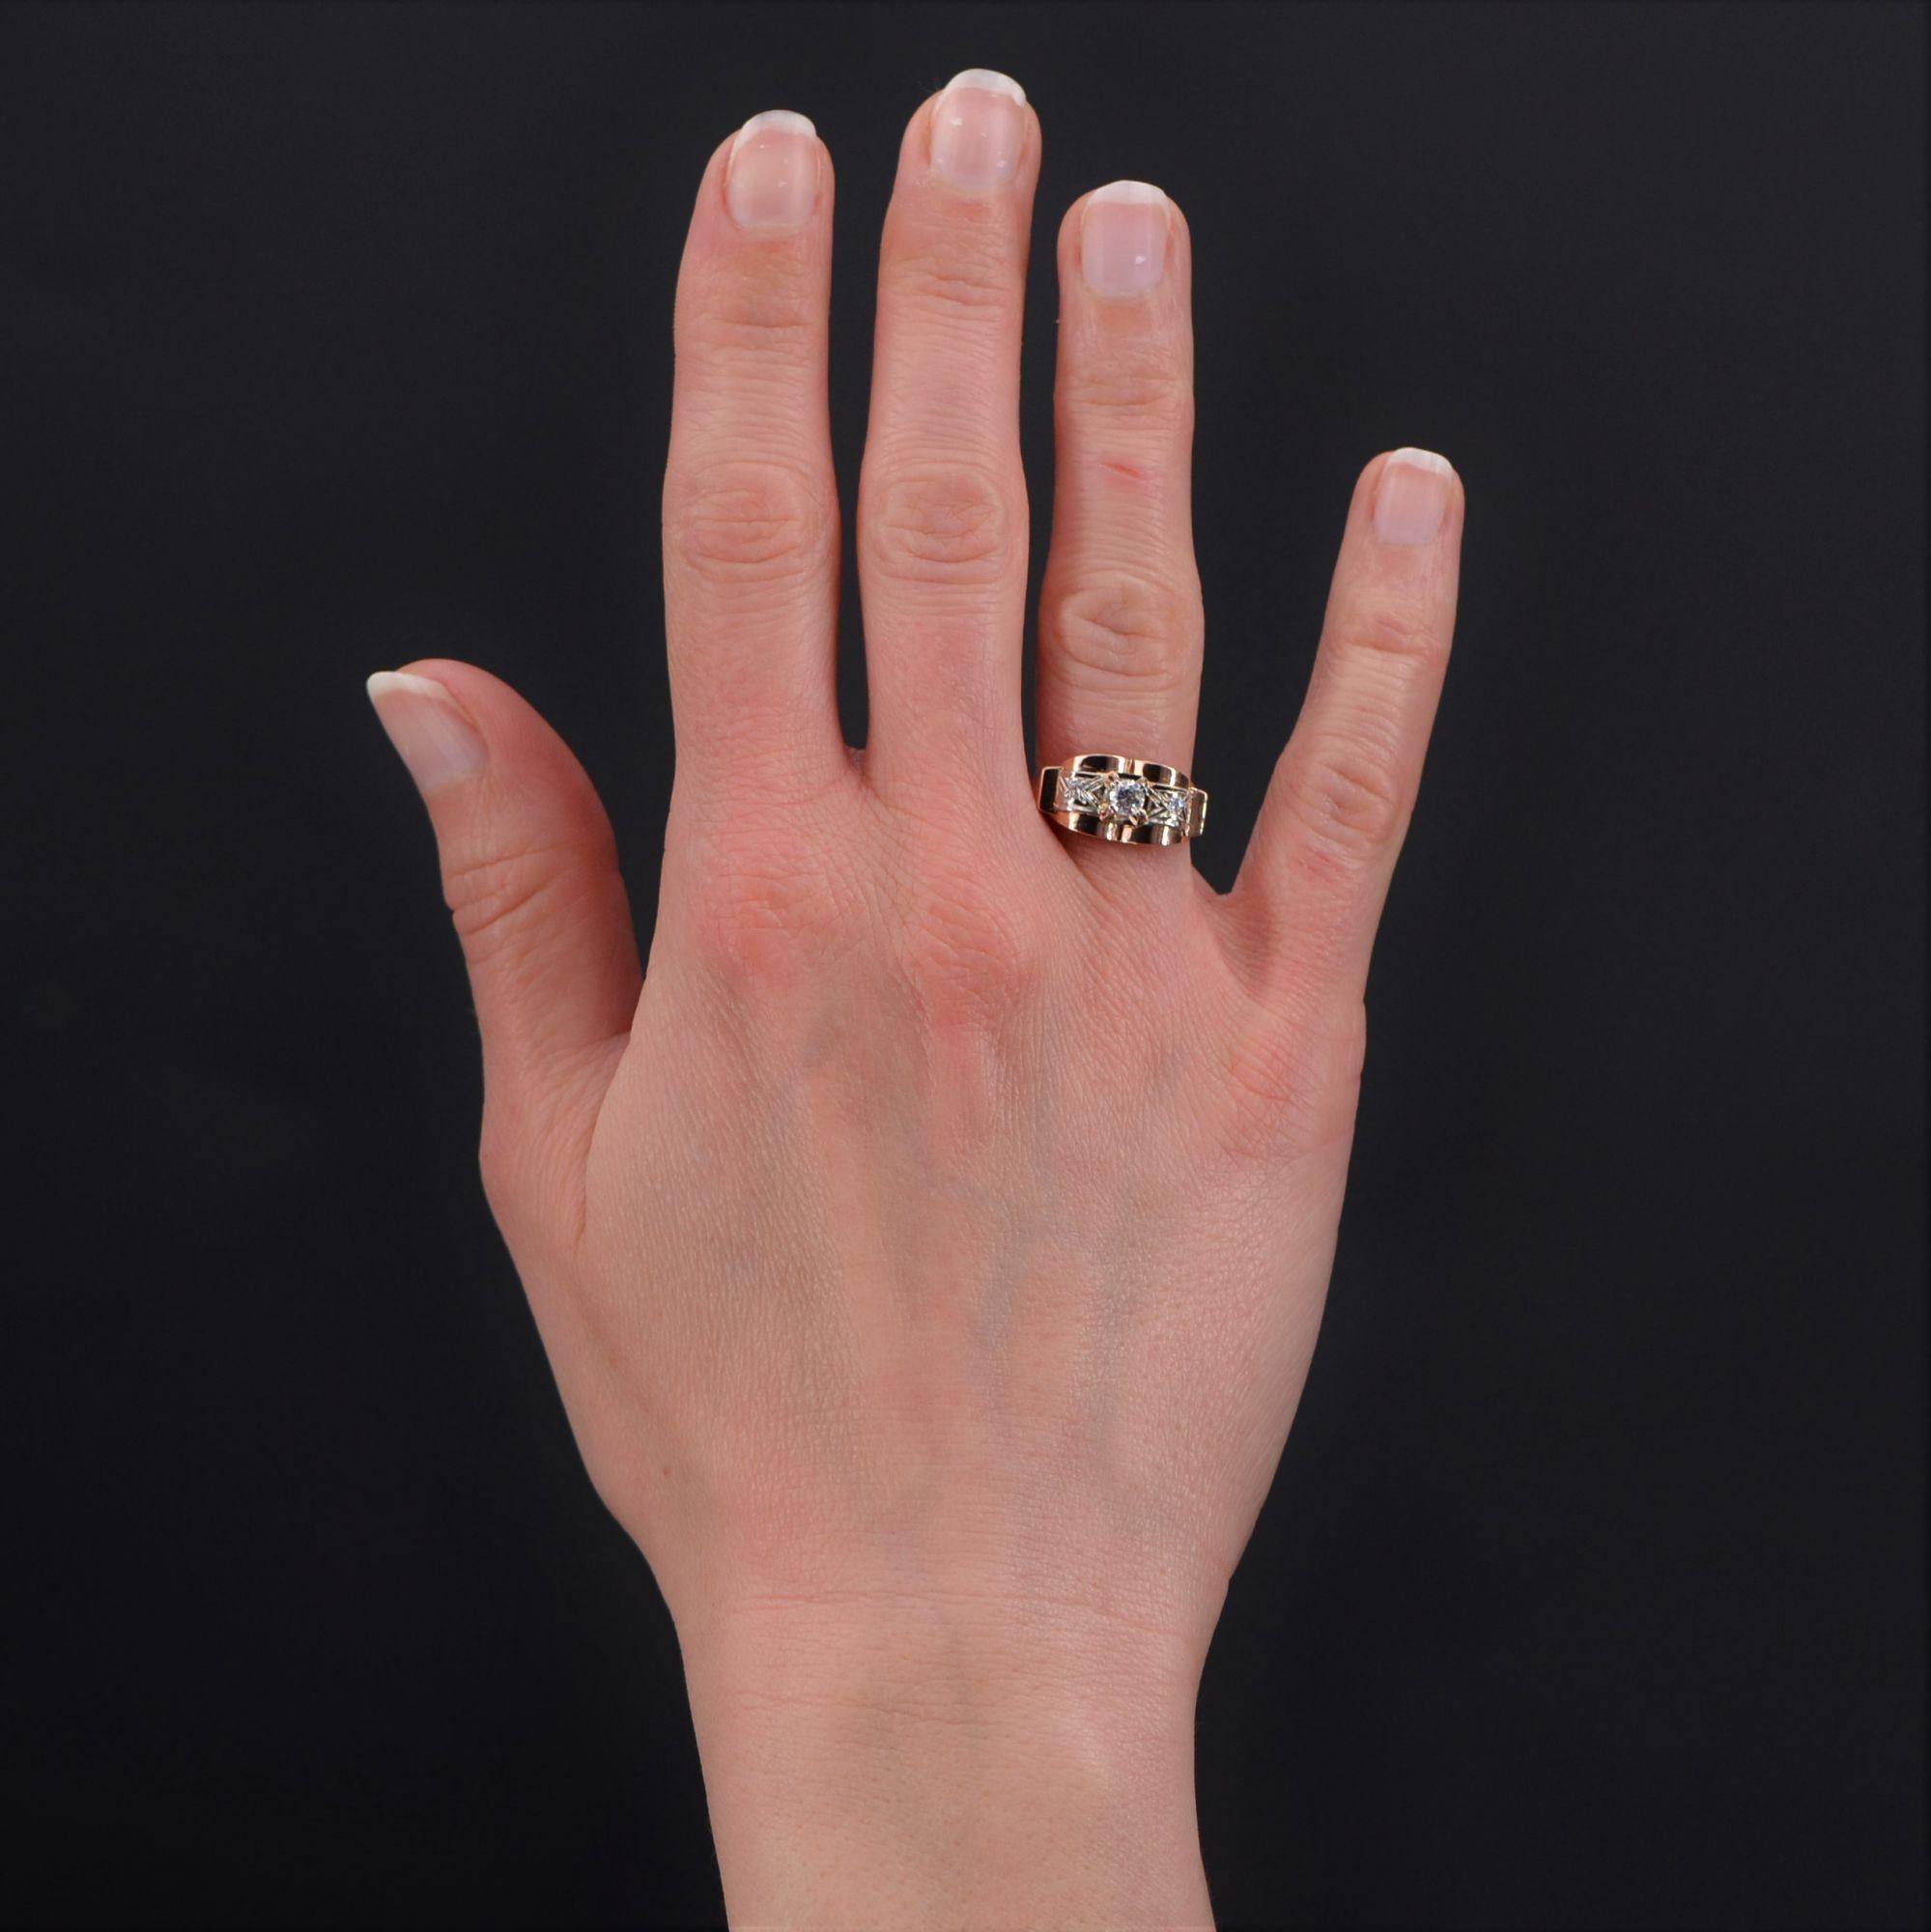 Ring in 18 karat rose gold, eagle head hallmark.
Charming antique ring, it consists of a rose gold bridge set on top, in applique, of a white gold pattern adorned with a modern brilliant- cut diamond in the center, and on either side, two small